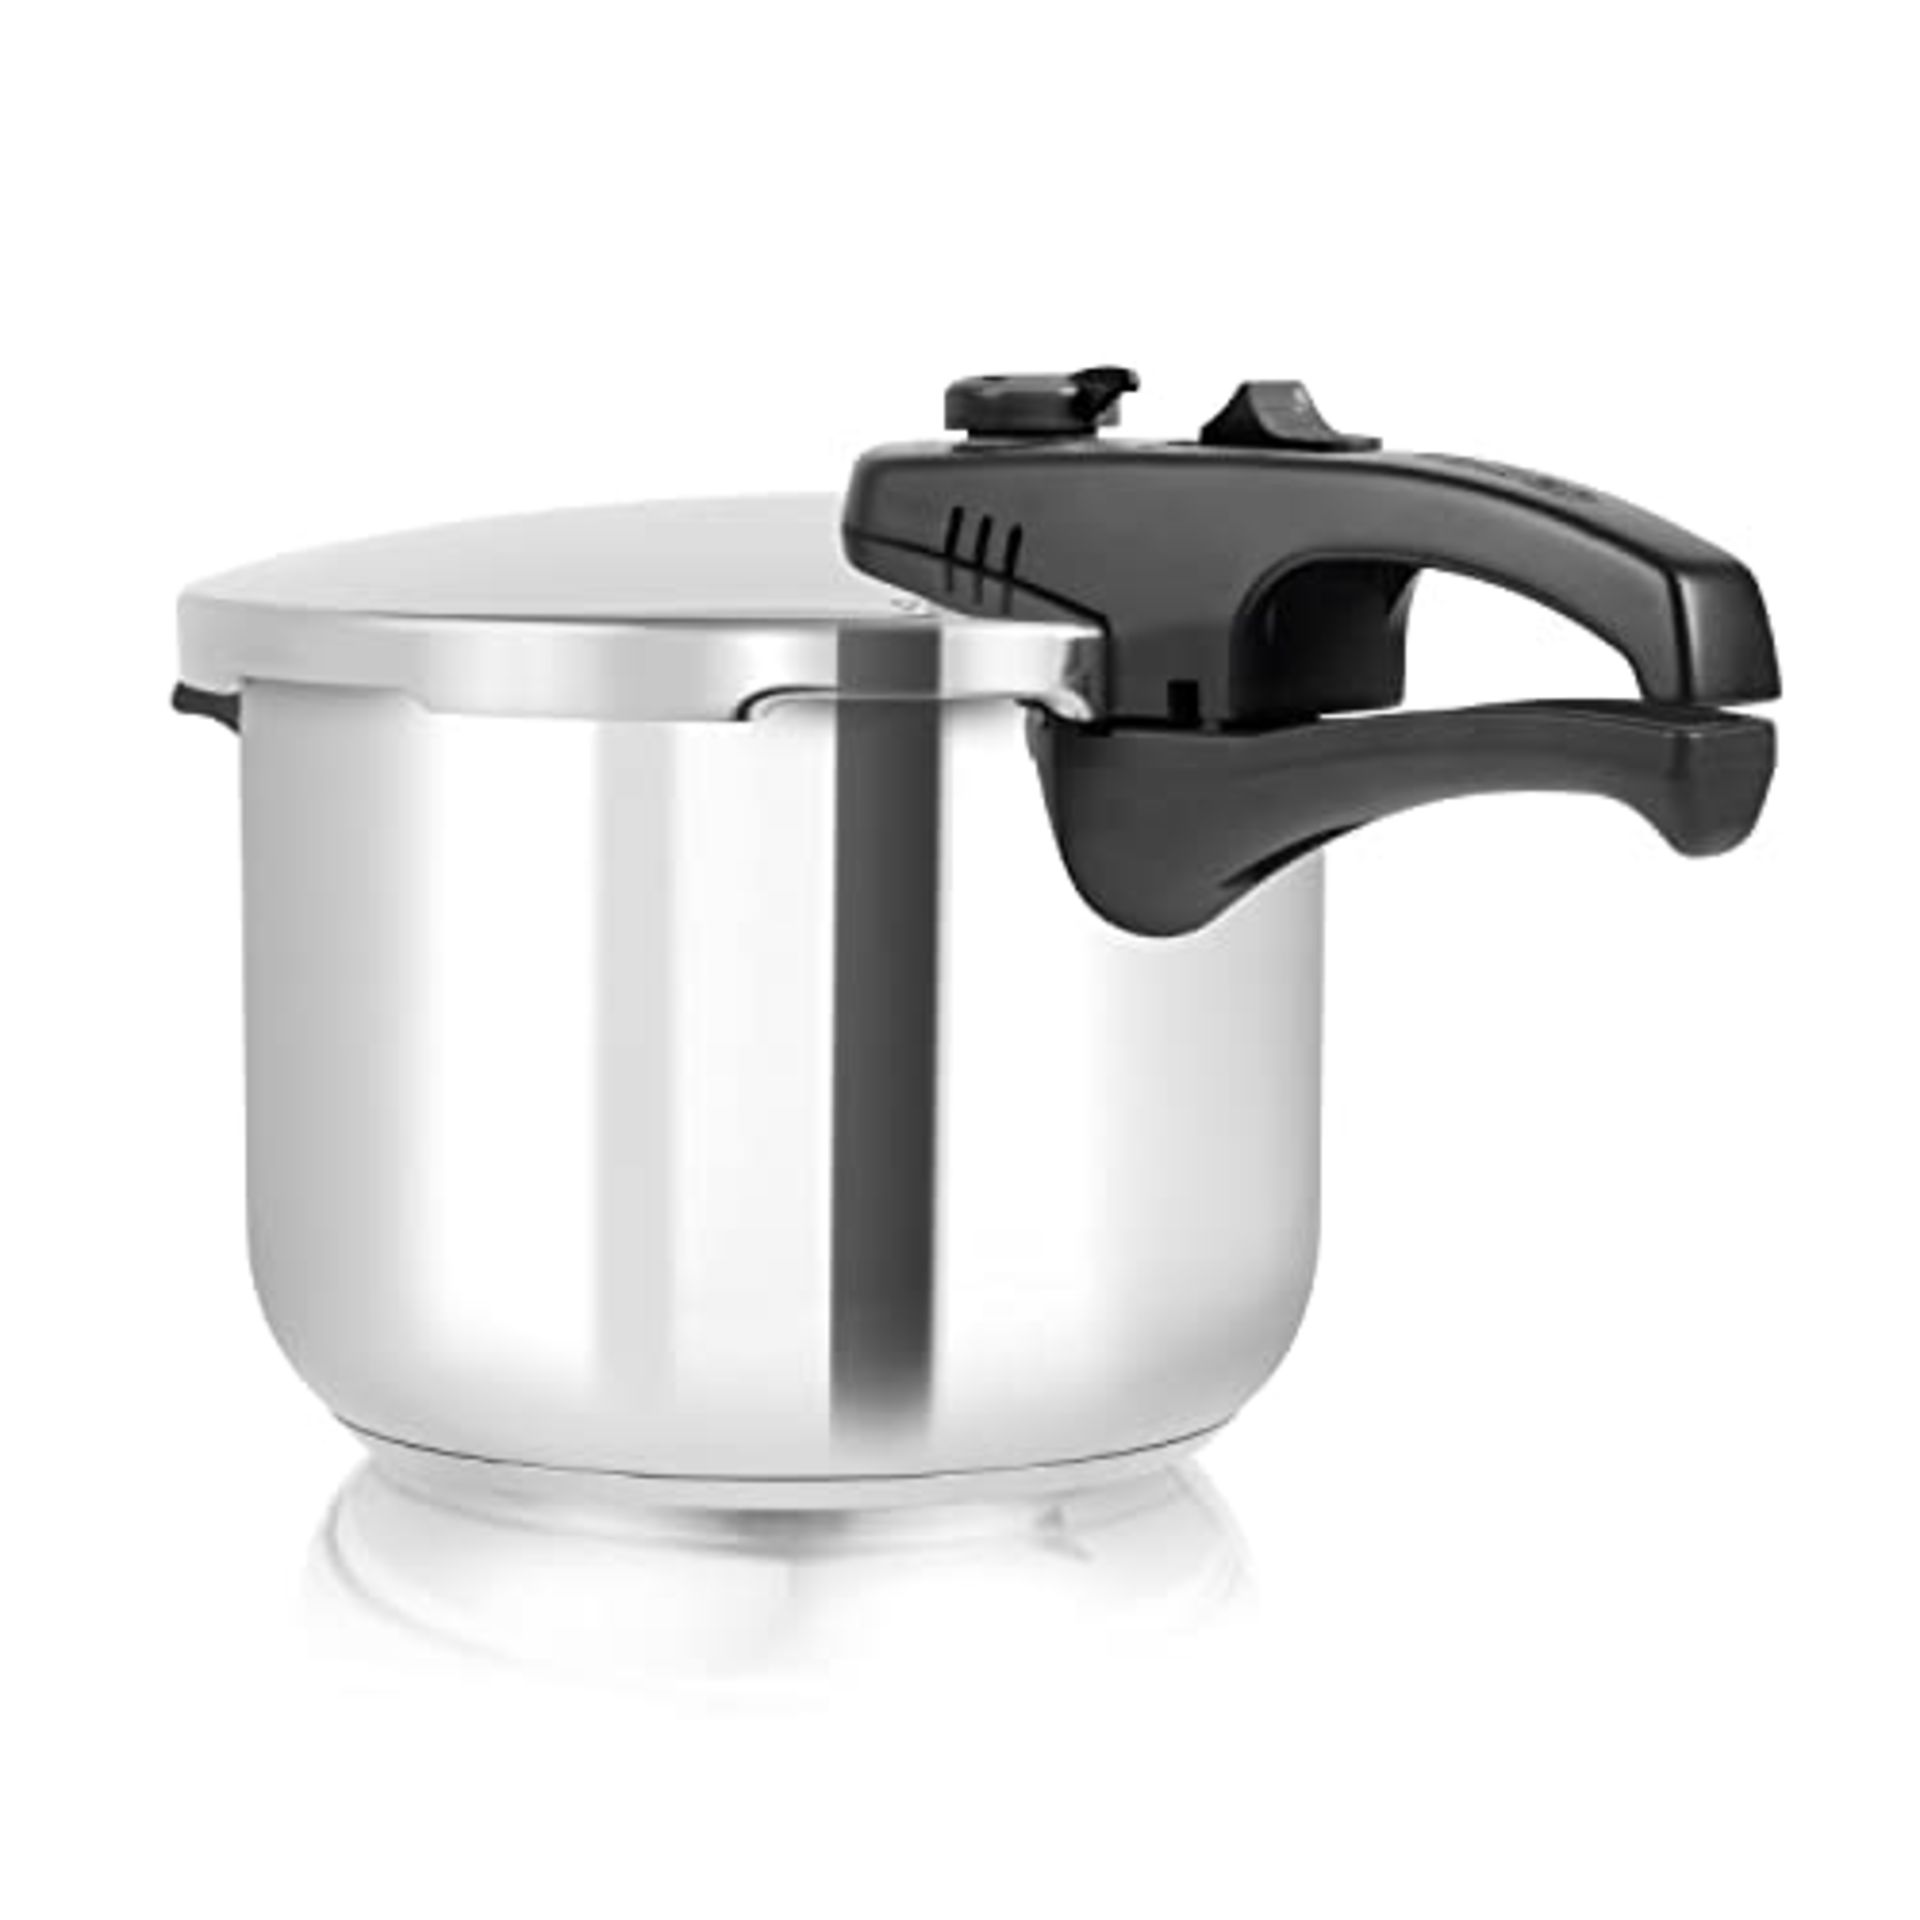 Tower T80244 Pressure Cooker with Steamer Basket, Stainless Steel, 6 Litre , Silver